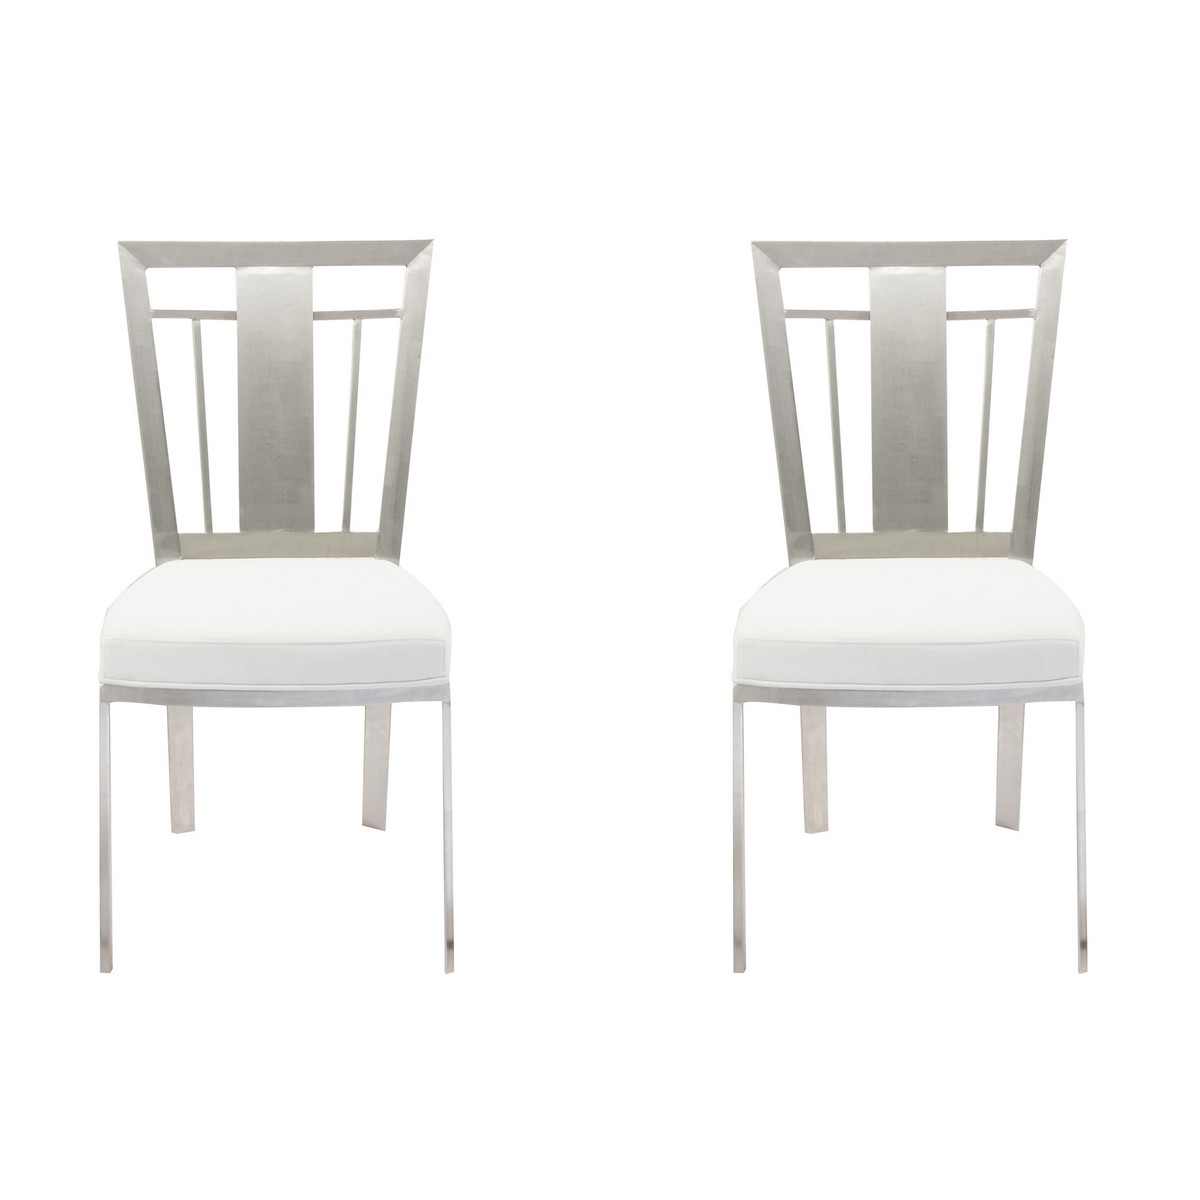 Armen Living Cleo Contemporary Dining Chair In White and Stainless Steel